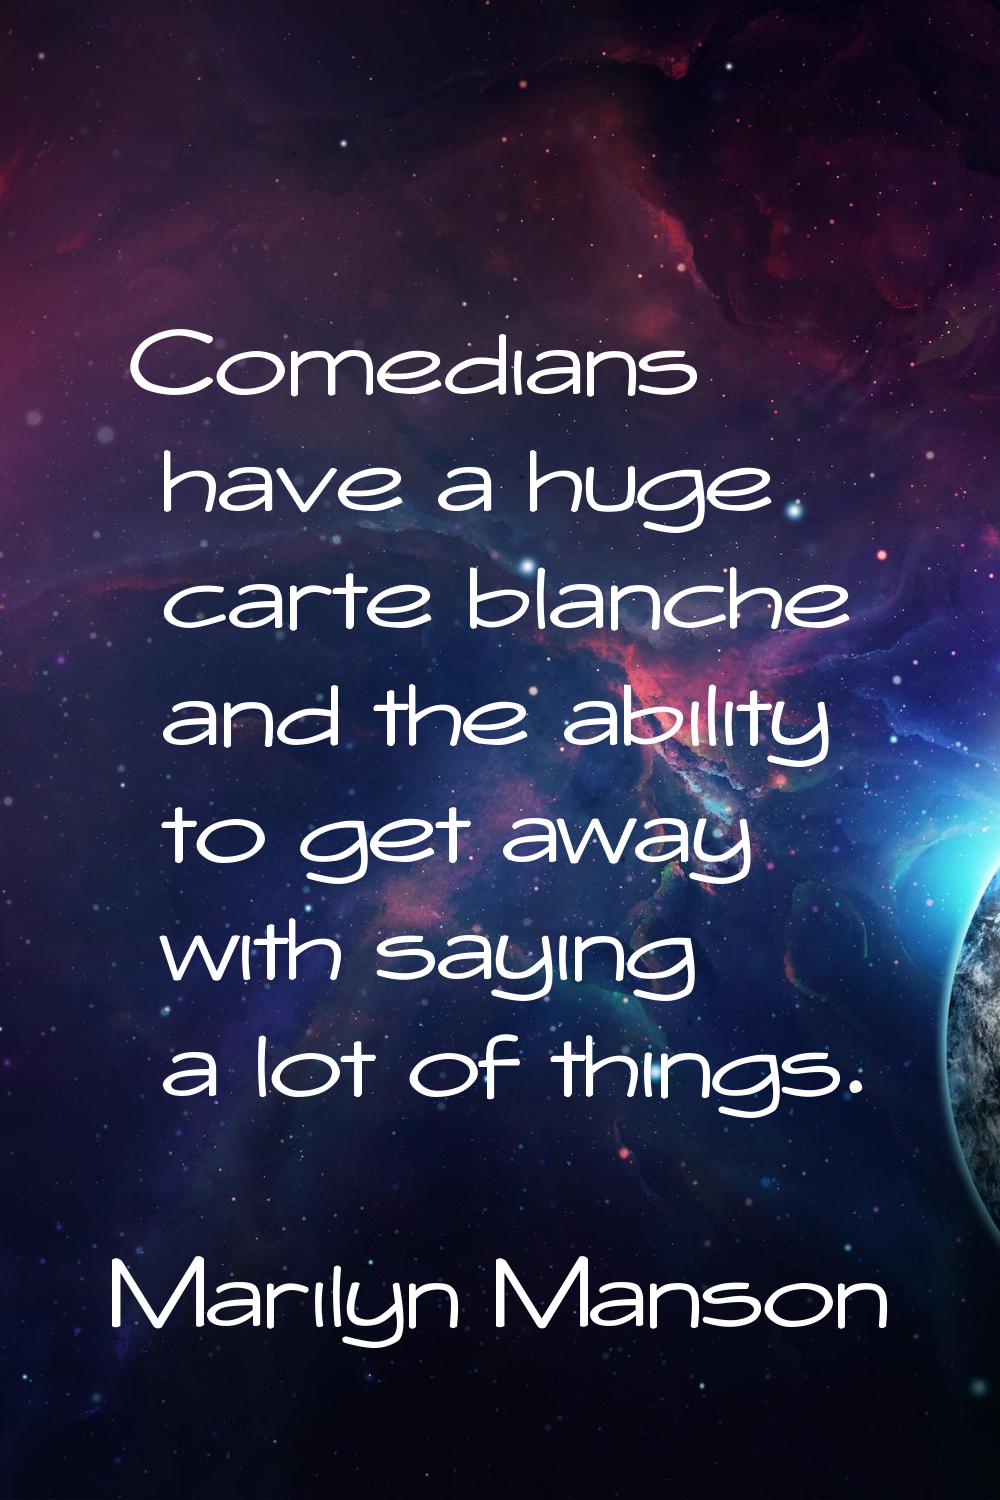 Comedians have a huge carte blanche and the ability to get away with saying a lot of things.